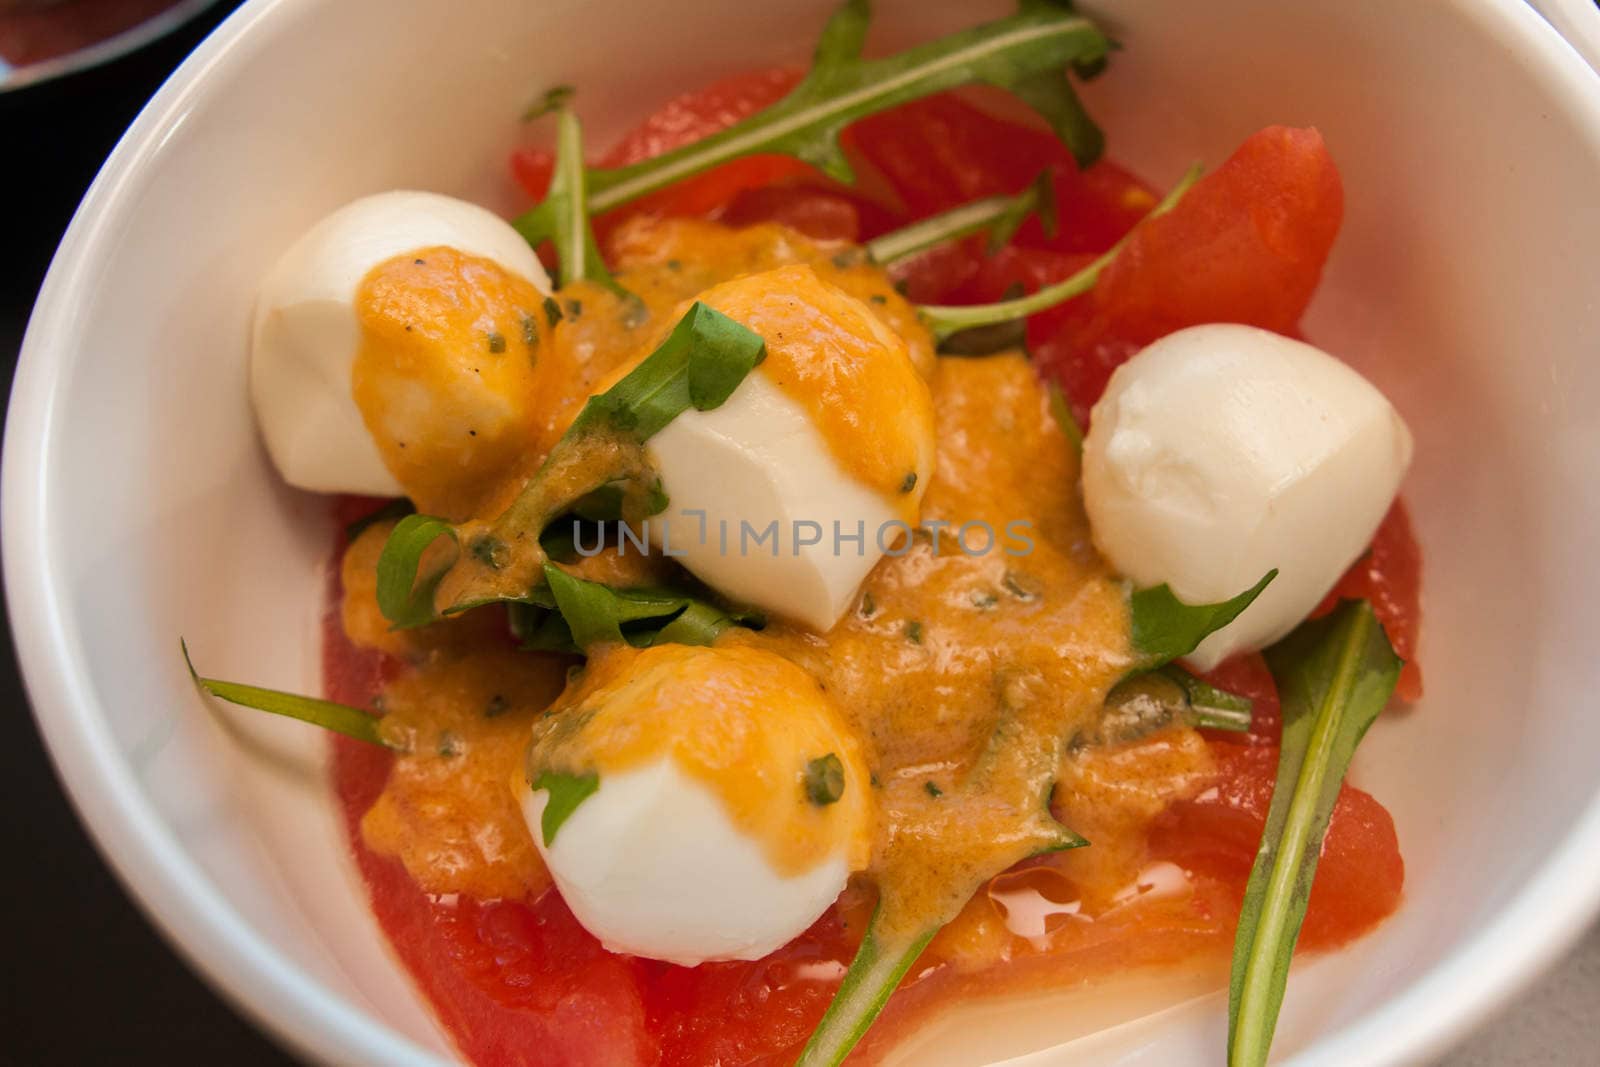 starter salad with tomatoes and eggs